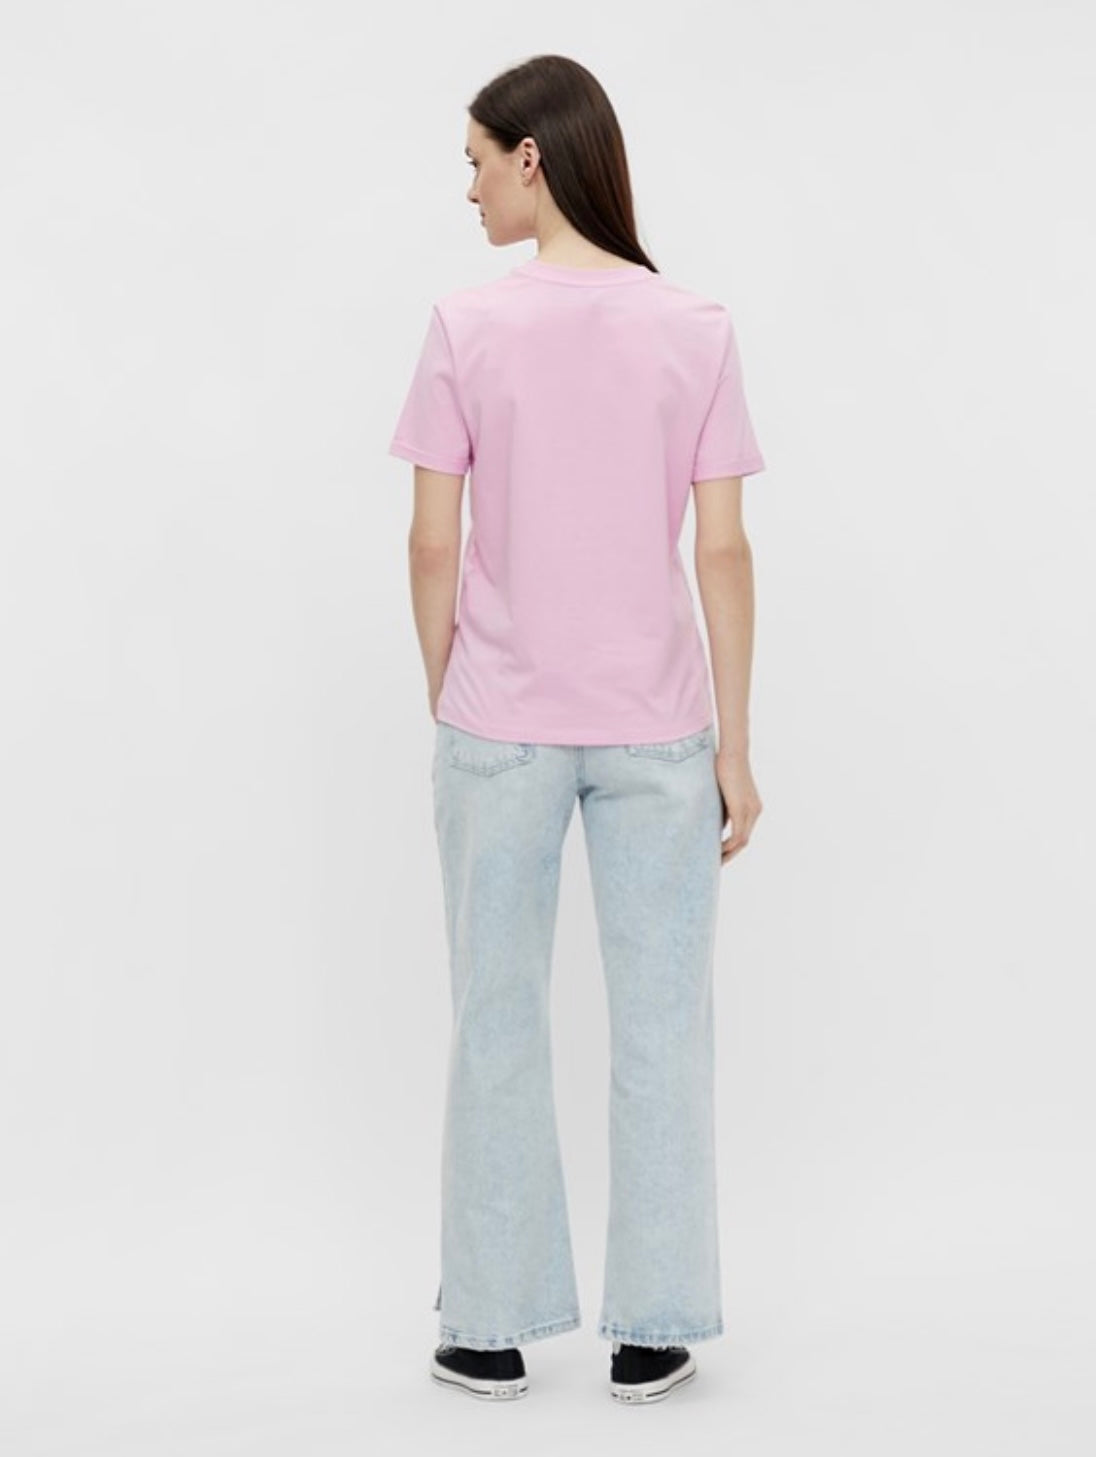 PIECES - RIA SS FOLD UP SOLID TEE - PASTEL LAVENDER